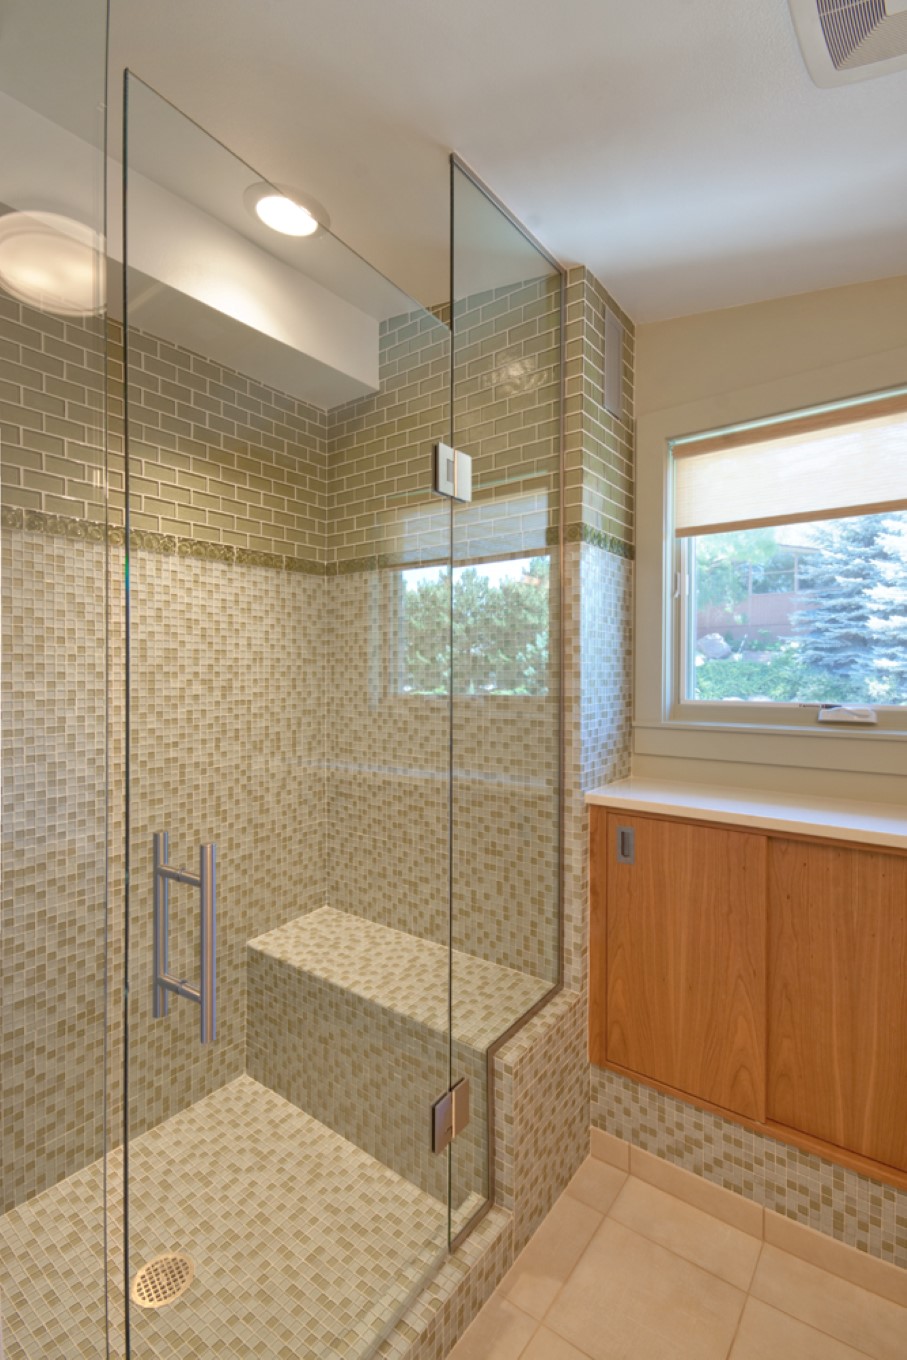 Brown Bathroom With Cool Brown Bathroom Tile Designed With Decorative Vanity Set Next To Frameless Shower Doors Idea Bathroom Frameless Shower Doors Perform Gorgeous Design